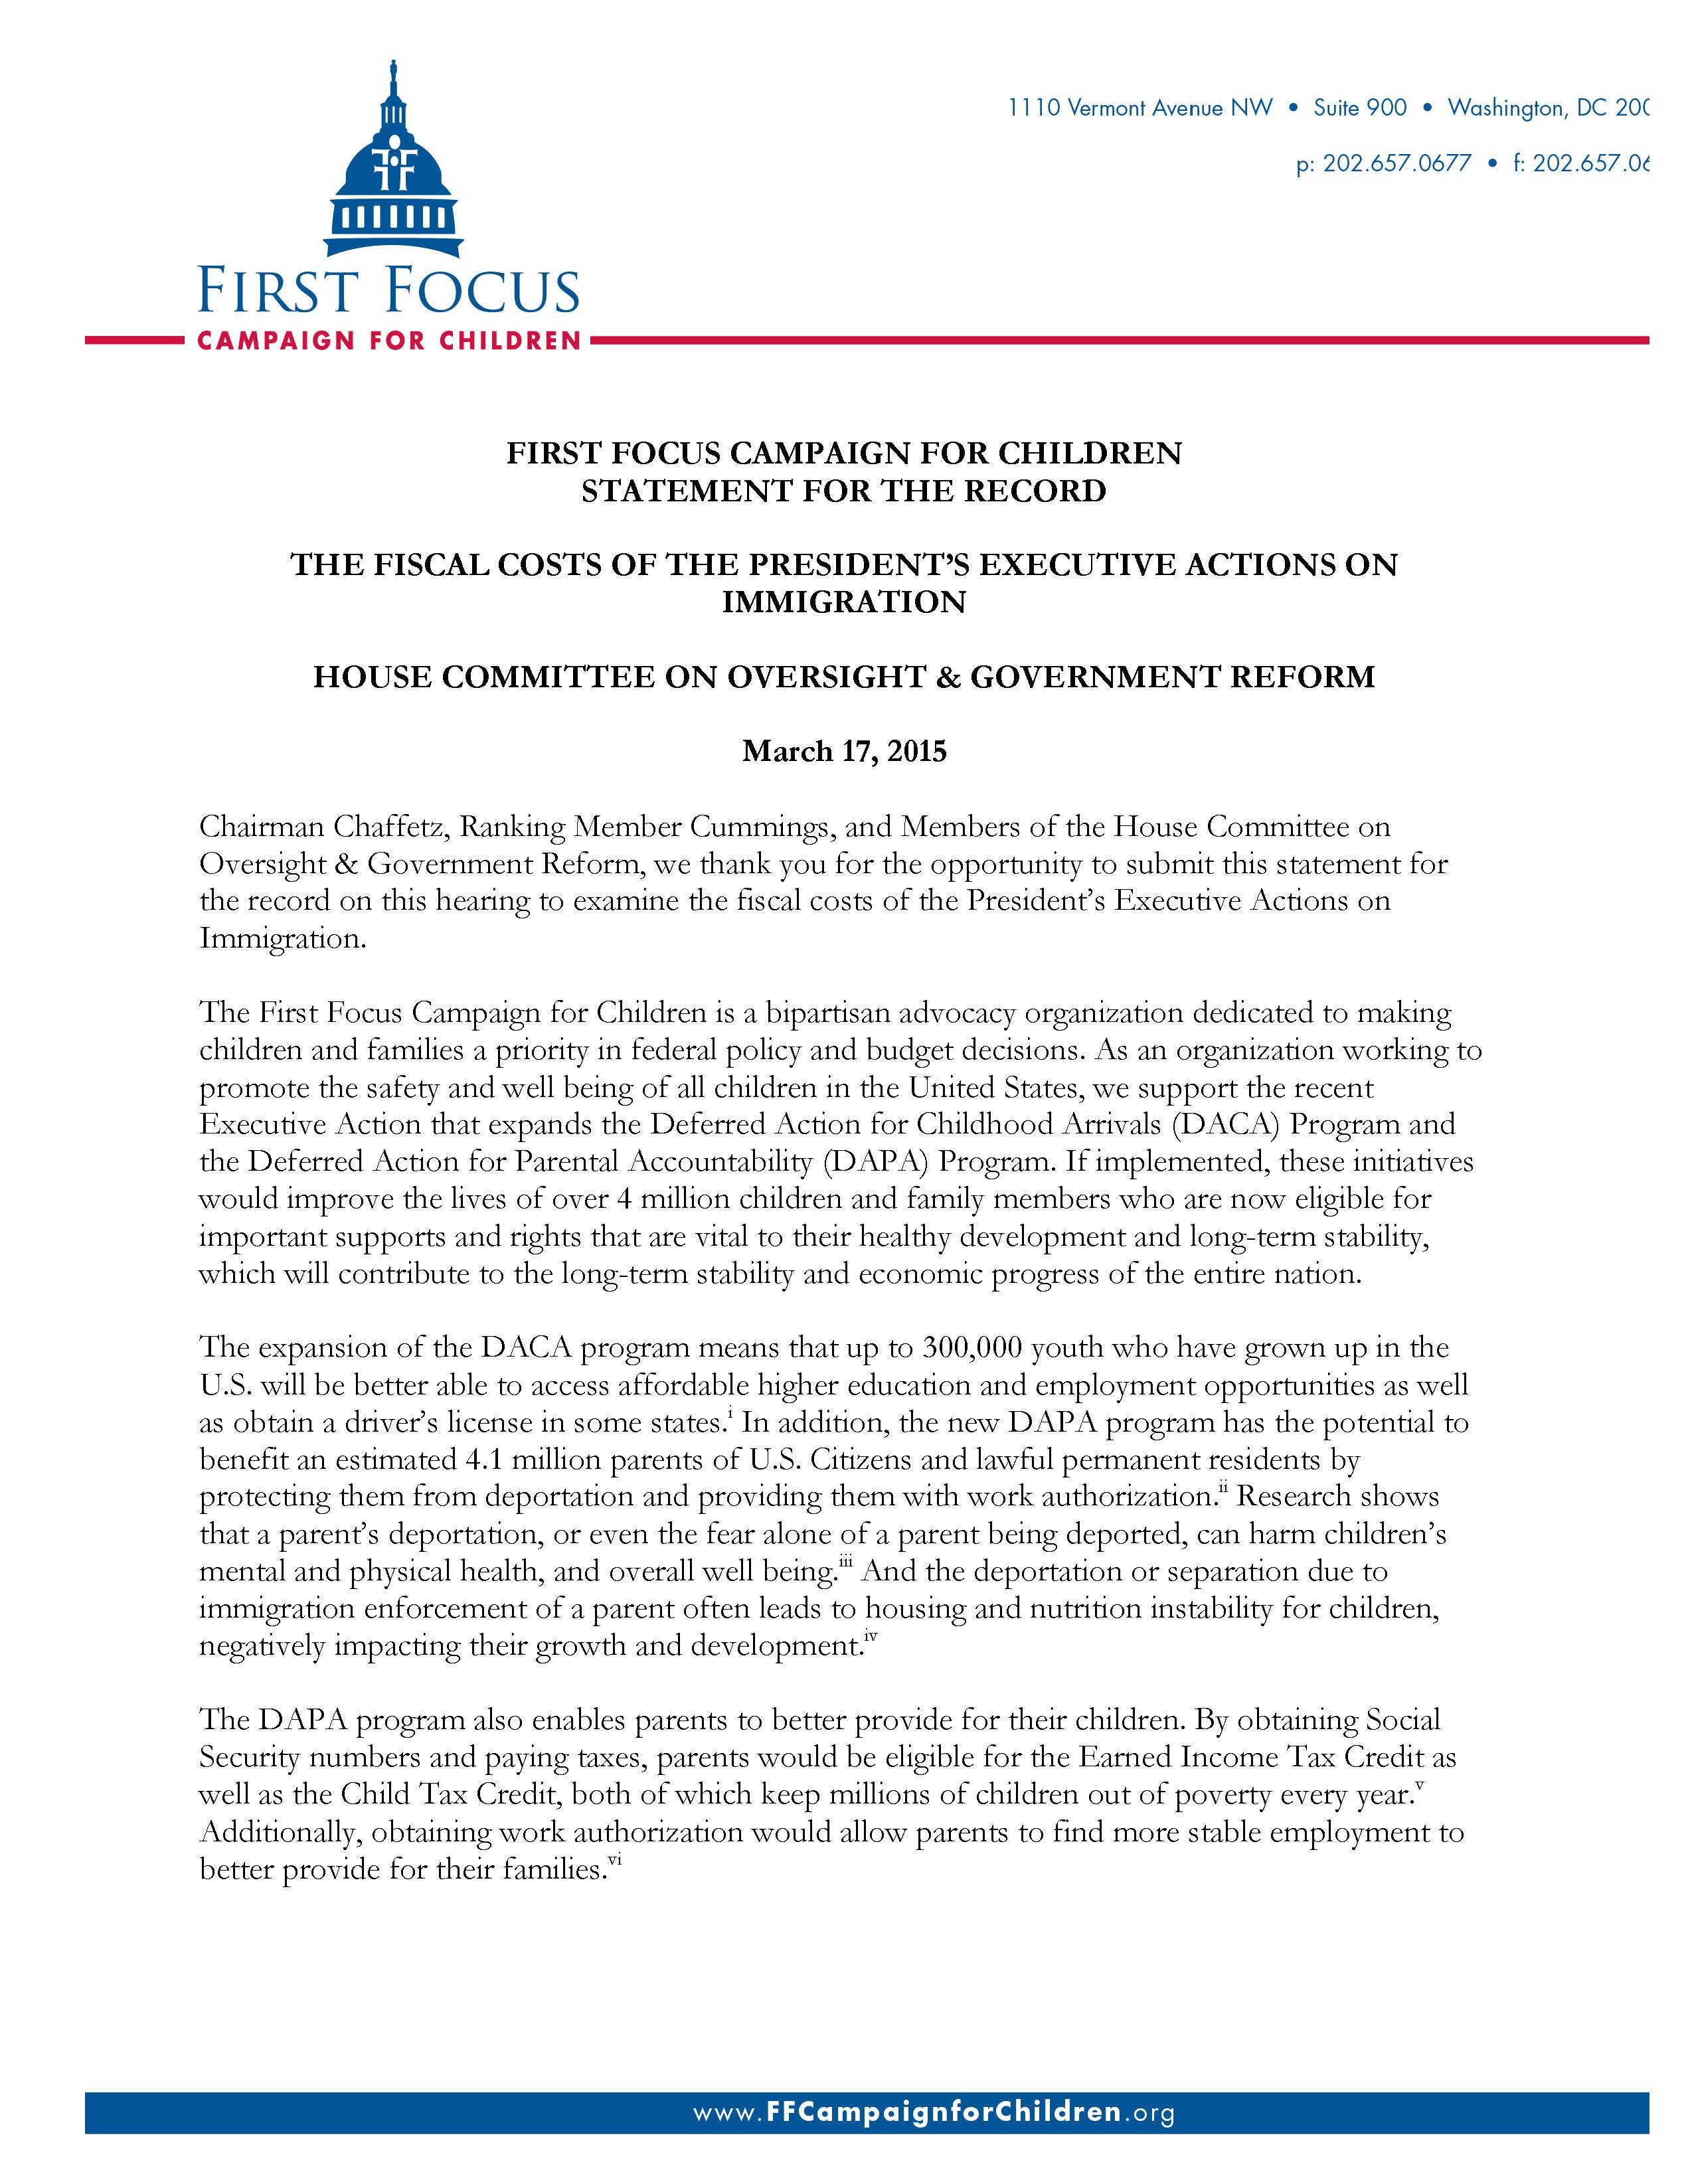 Statement for the Record, The Fiscal Costs of The President's Executive Actions on Immigration_Page_1